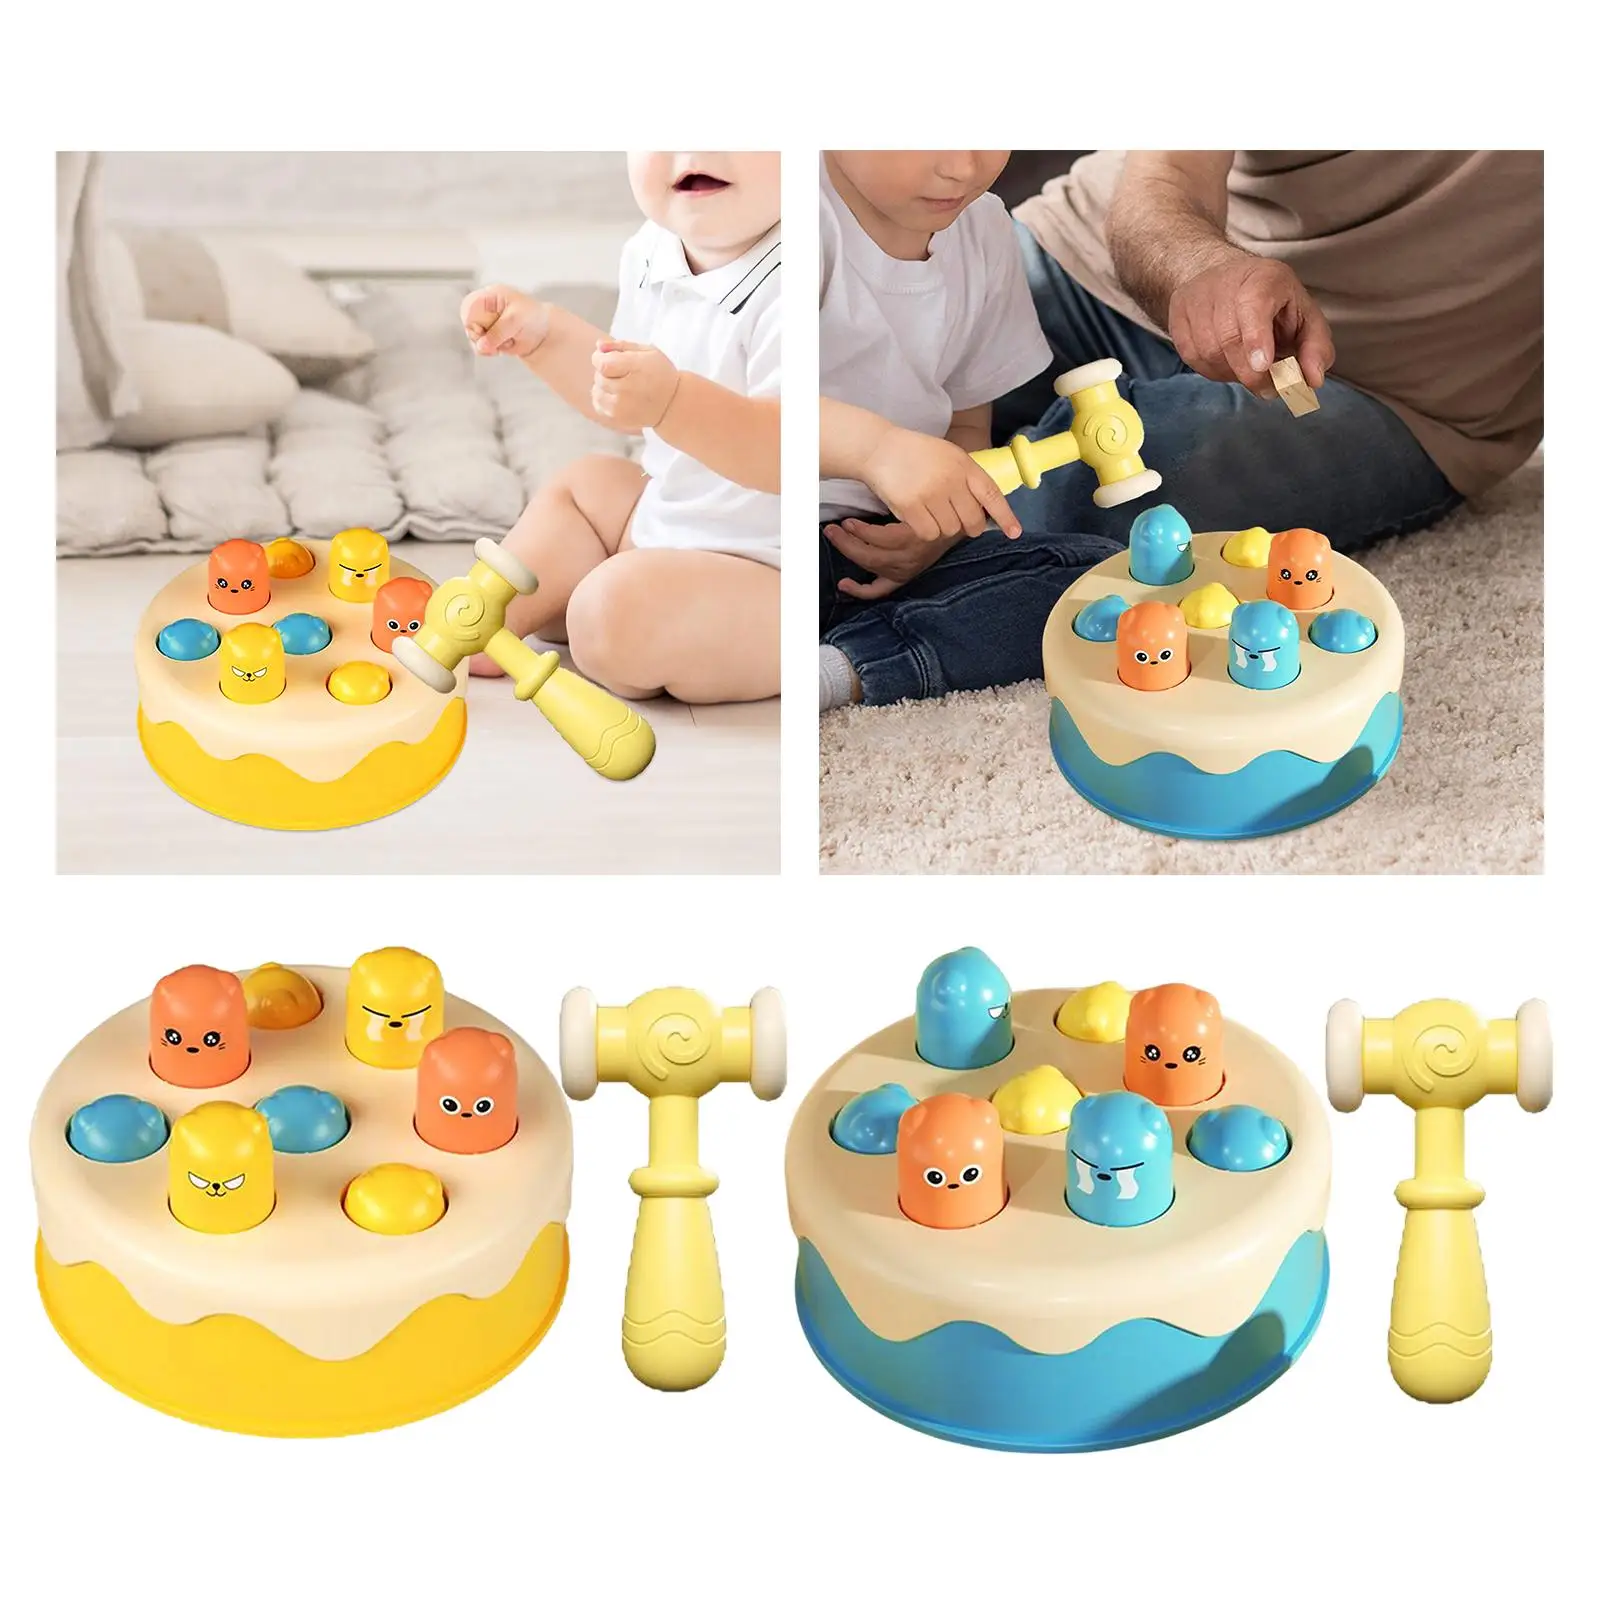 Whack A Hamster Game Hammering Interactive Toy to Practice Motor Skills Improve Children Hand Eye Coordination